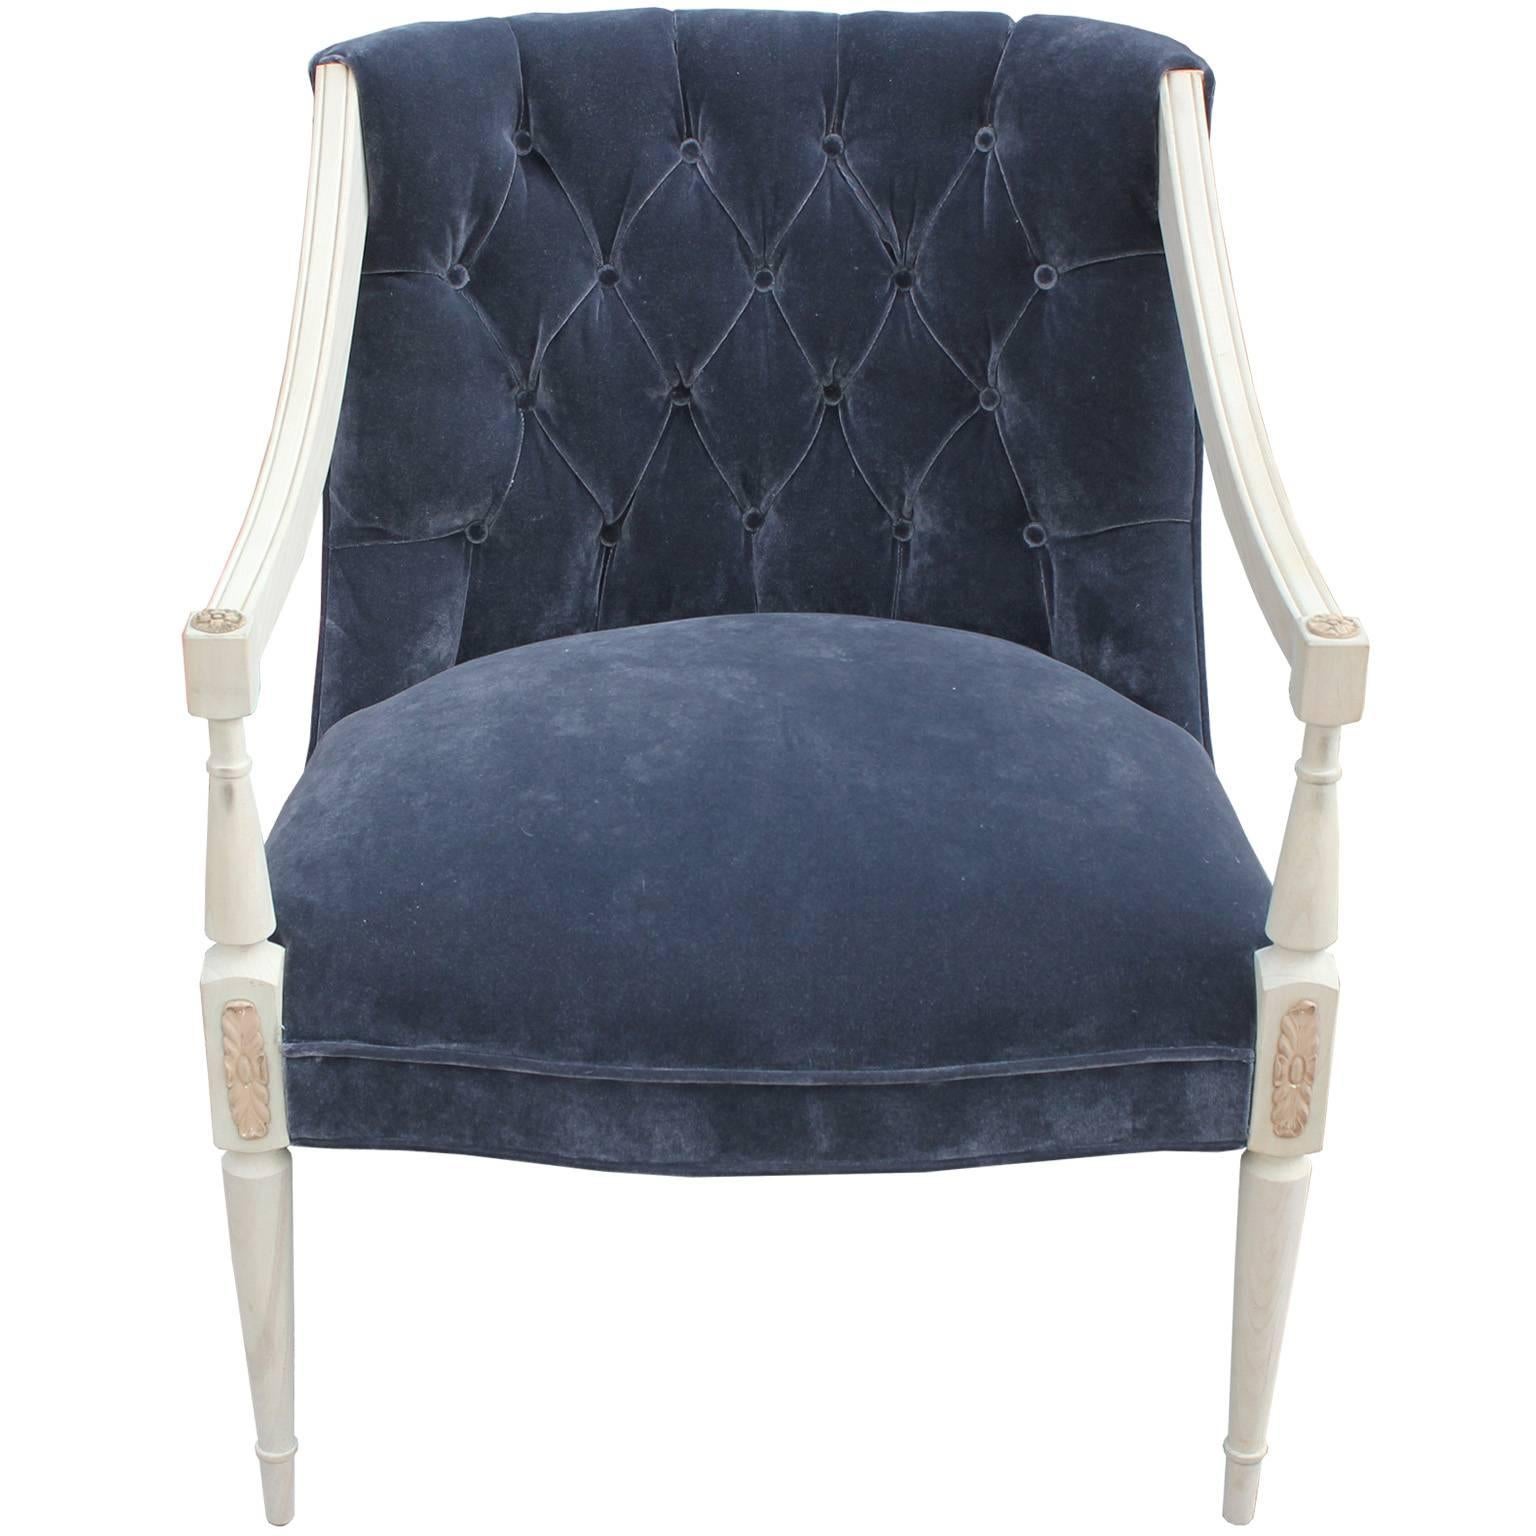 Elegant open-arm French lounge or accent chair. Chair frames has graceful lines with beautiful detailing finished in a pale, bleached wood. Freshly upholstered in a deeply tufted, grey velvet. Perfect in a Hollywood Regency, transitional or